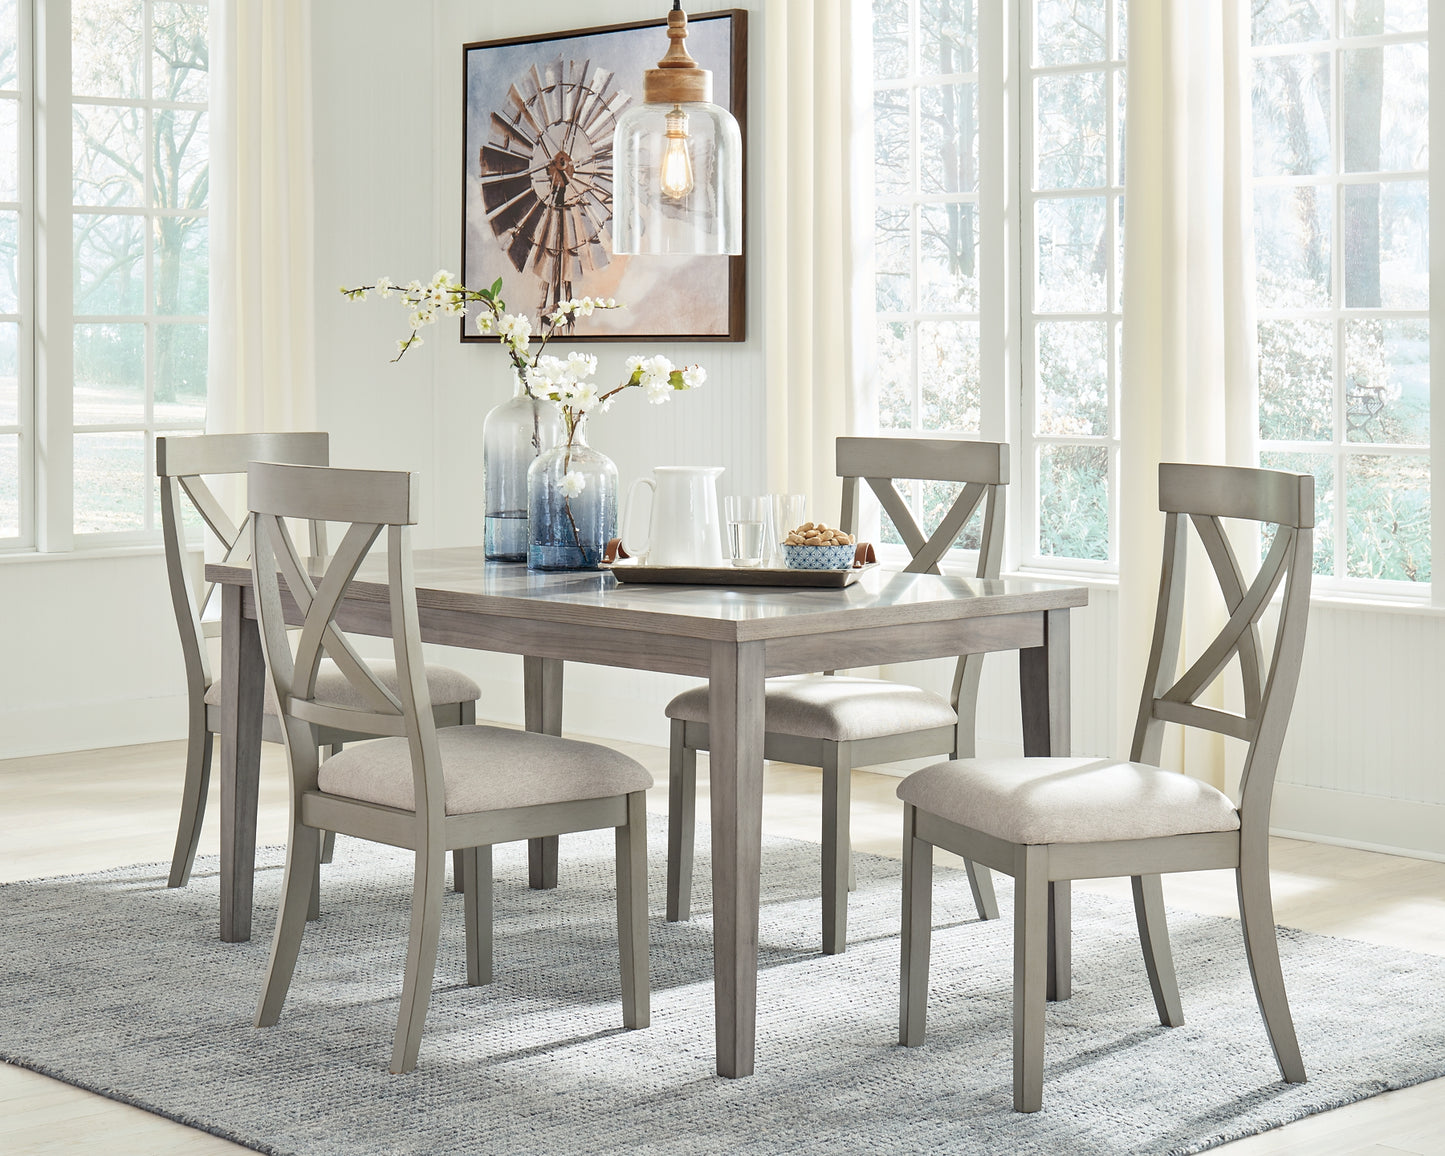 Ashley Express - Parellen Dining Table and 4 Chairs